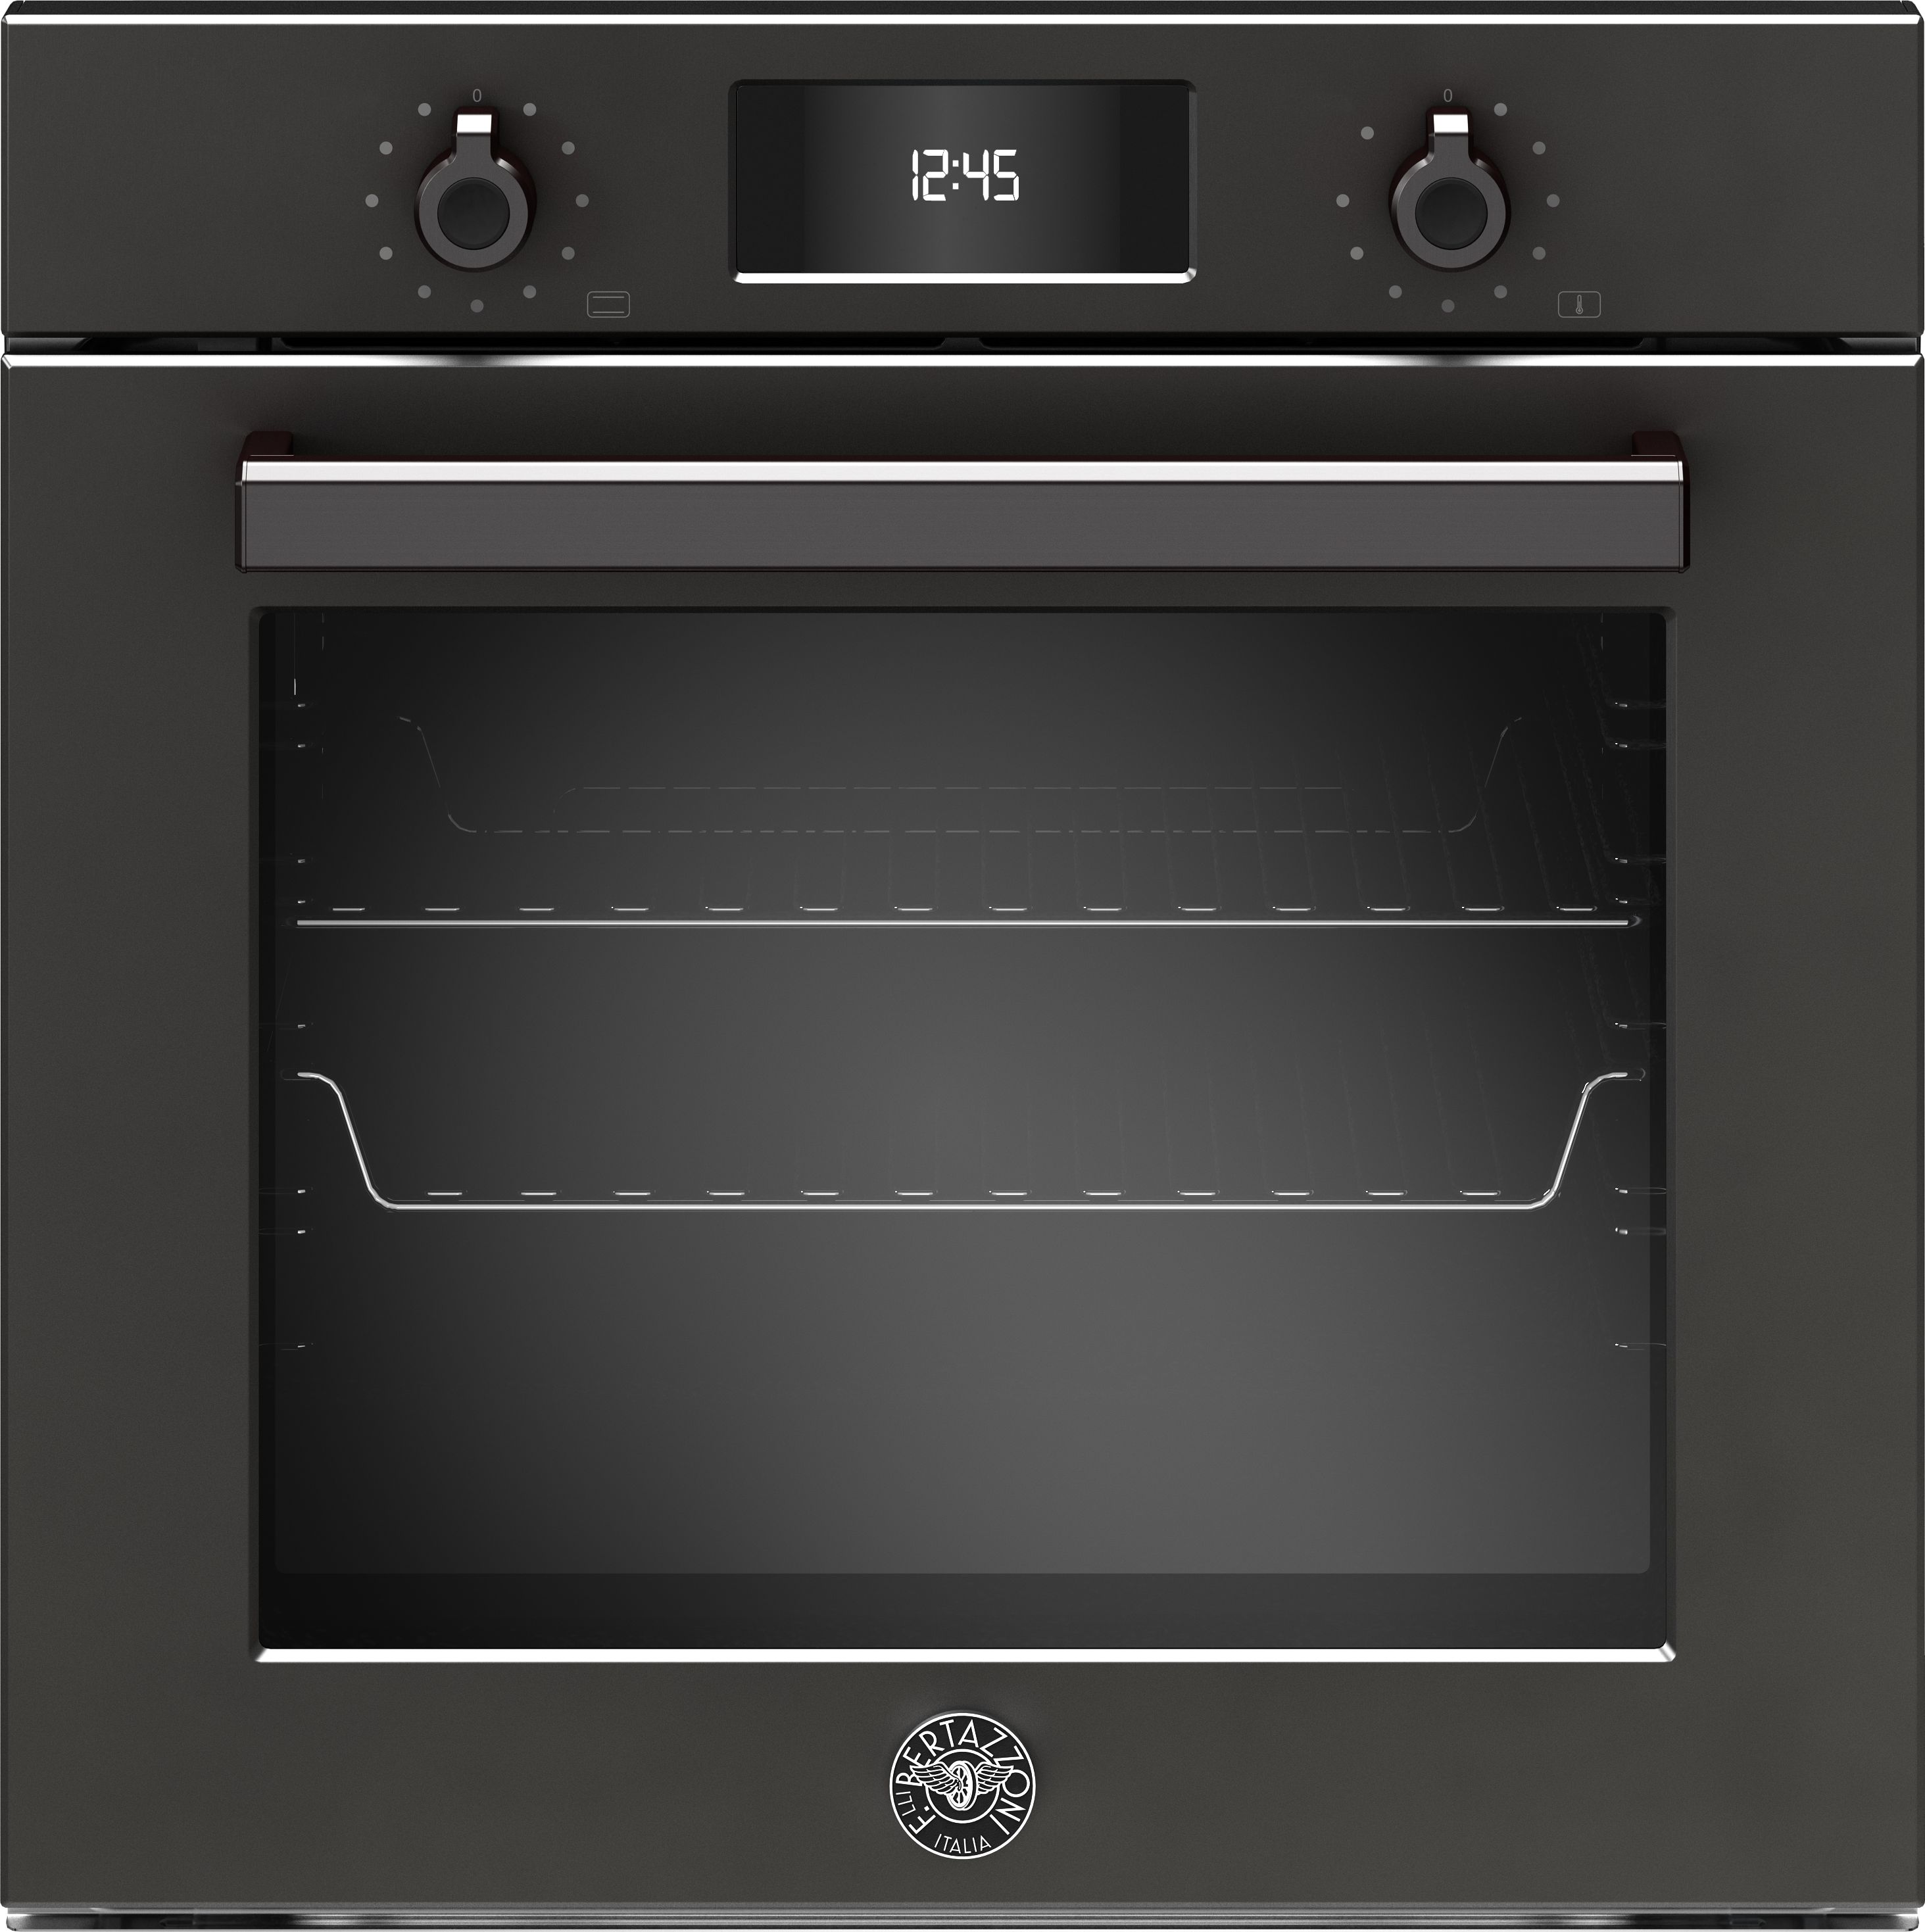 Bertazzoni Professional Series F6011PROPLN Built In Electric Single Oven with Pyrolytic Cleaning - Carbonio - A++ Rated, Black